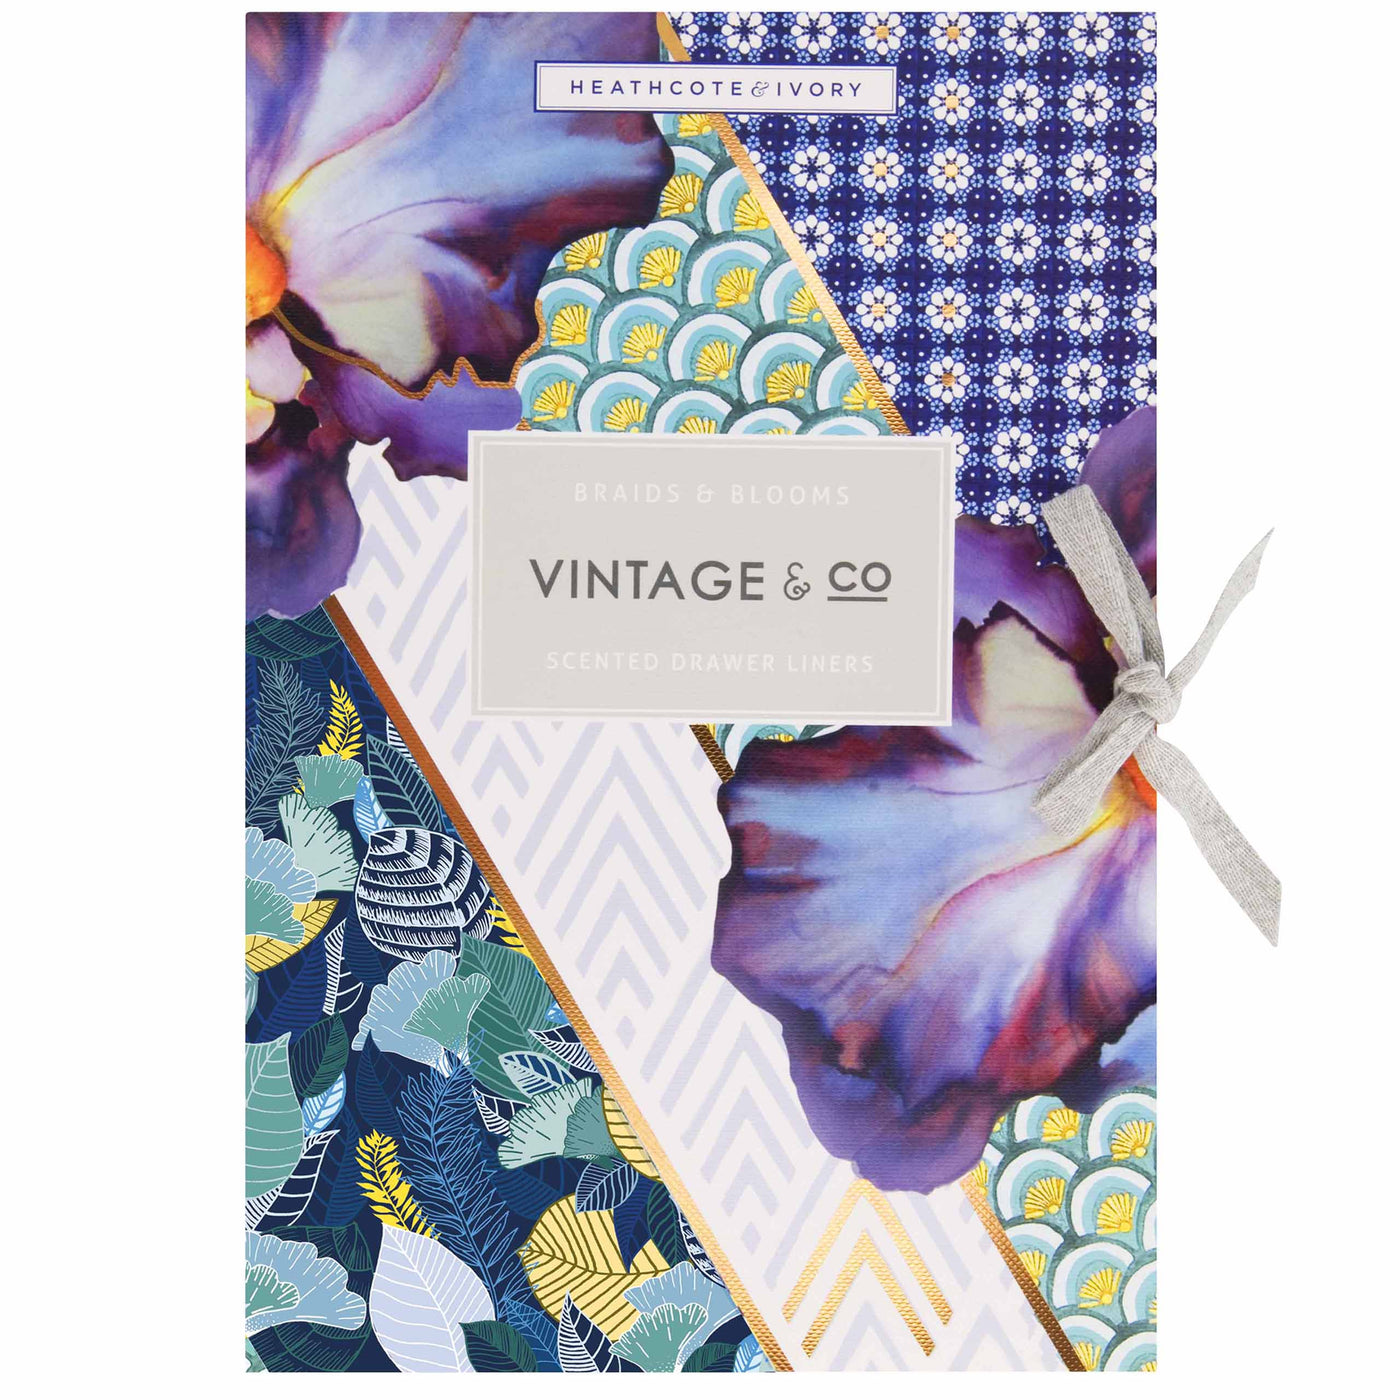 Vintage & Co Braids & Blooms Scented Drawer Liners - Heathcote & Ivory